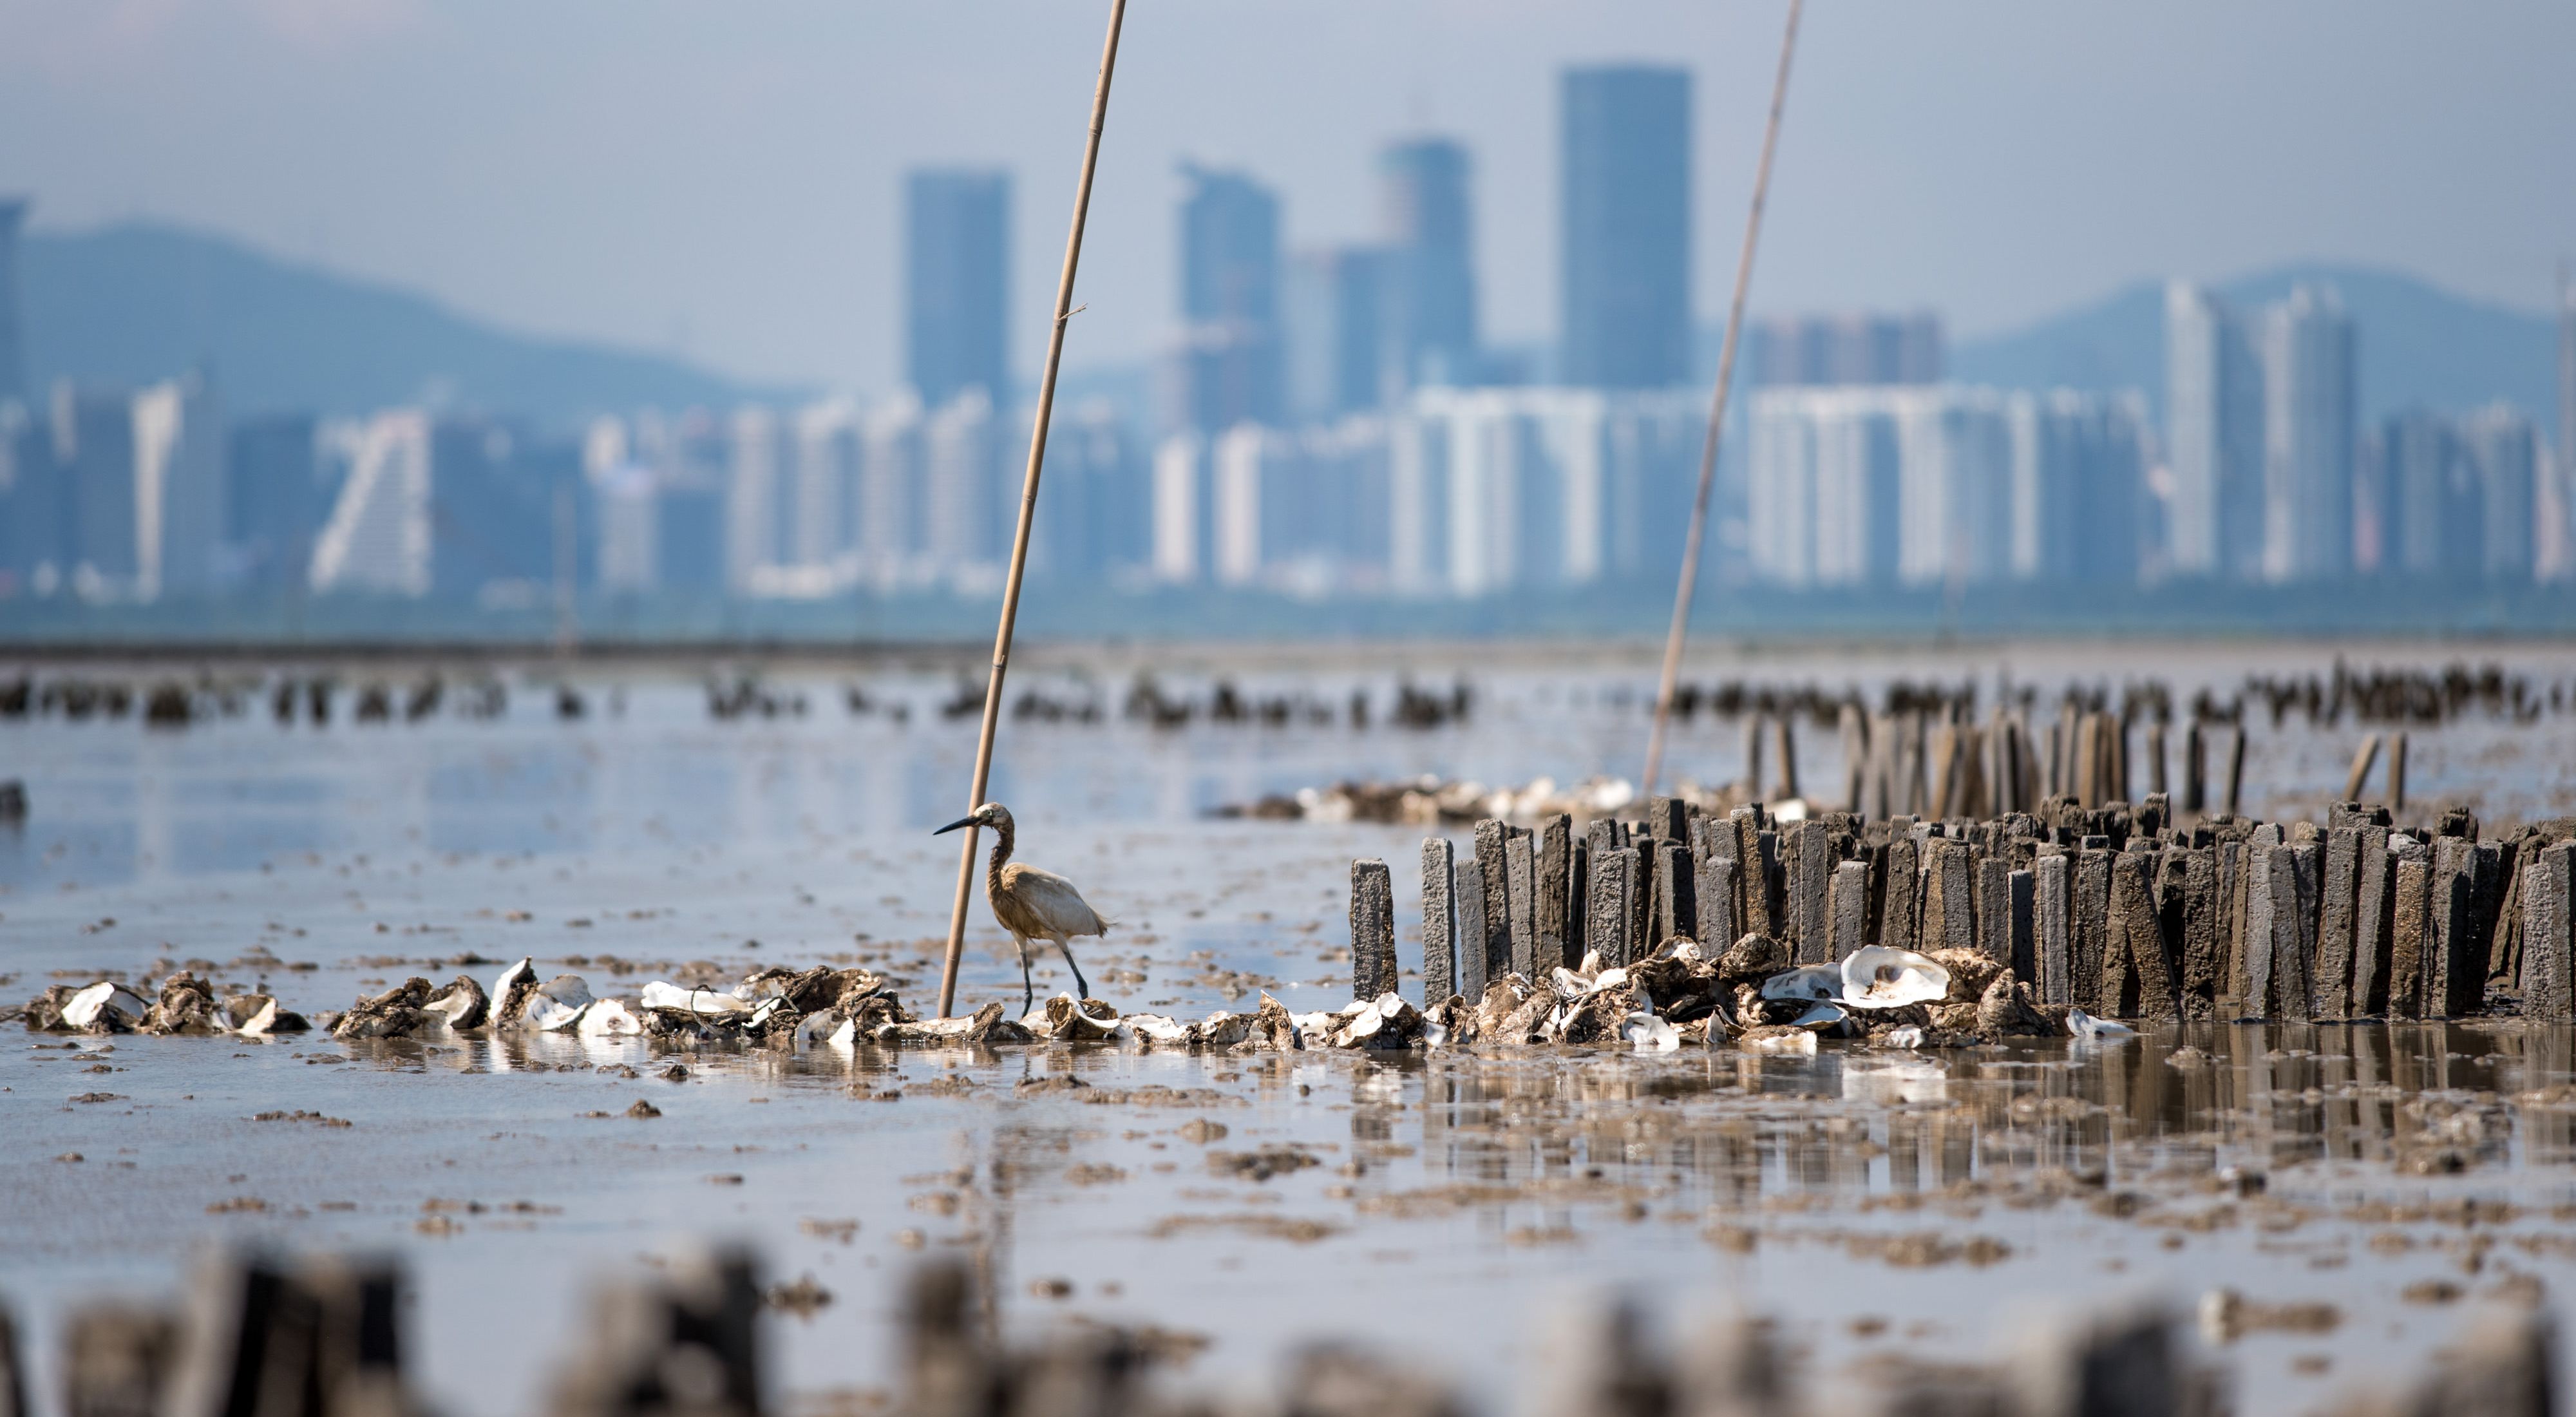 A waterbird stands on a collection of oyster shells in the bay.